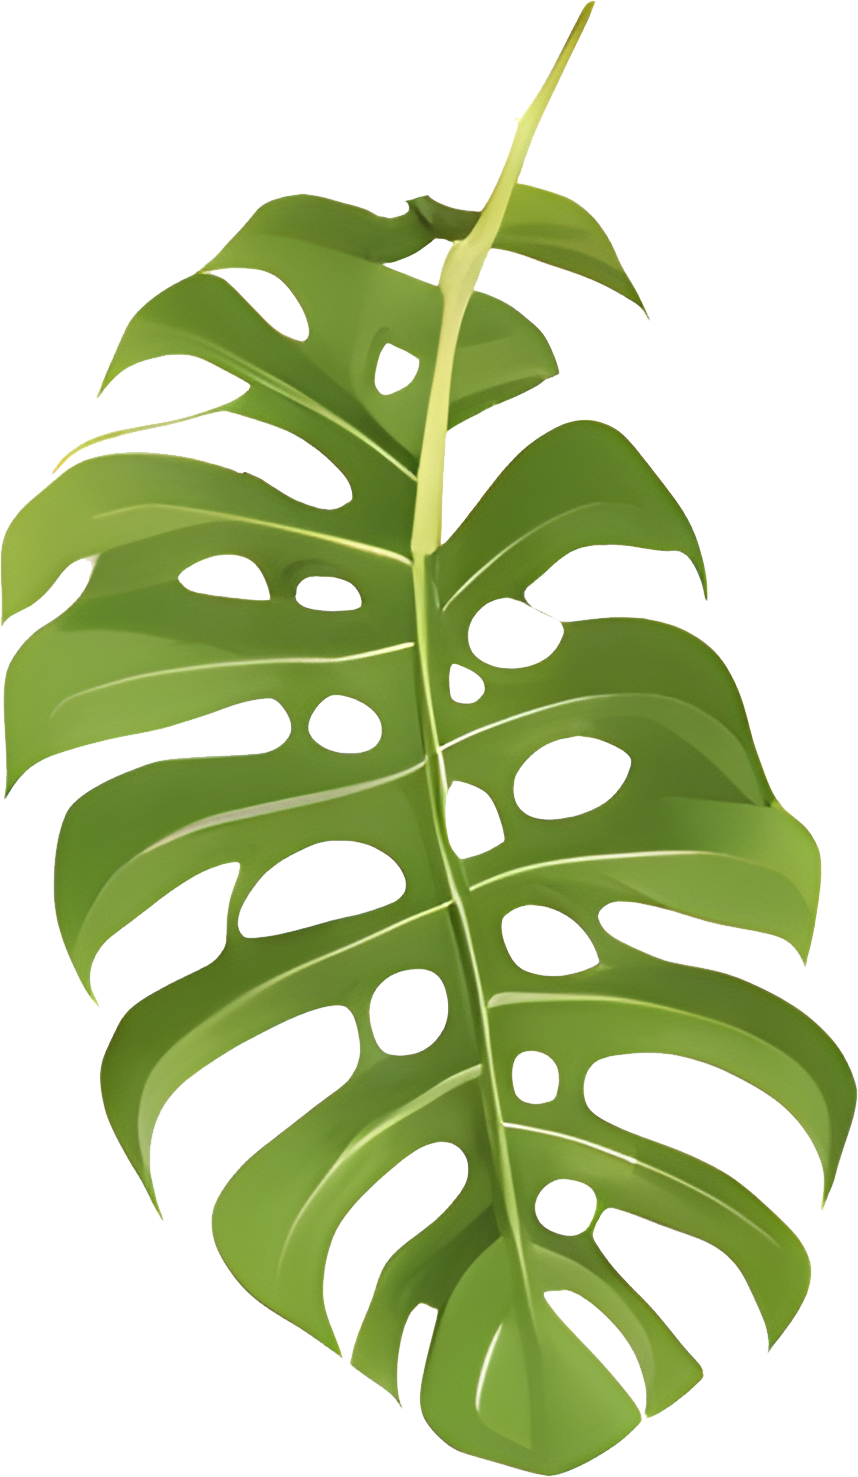 High-Res Leaf PNG Green Foliage Image, Tropical different type exotic leaves set. Jungle plants. Calathea, Monstera and different style of palm leaves_1